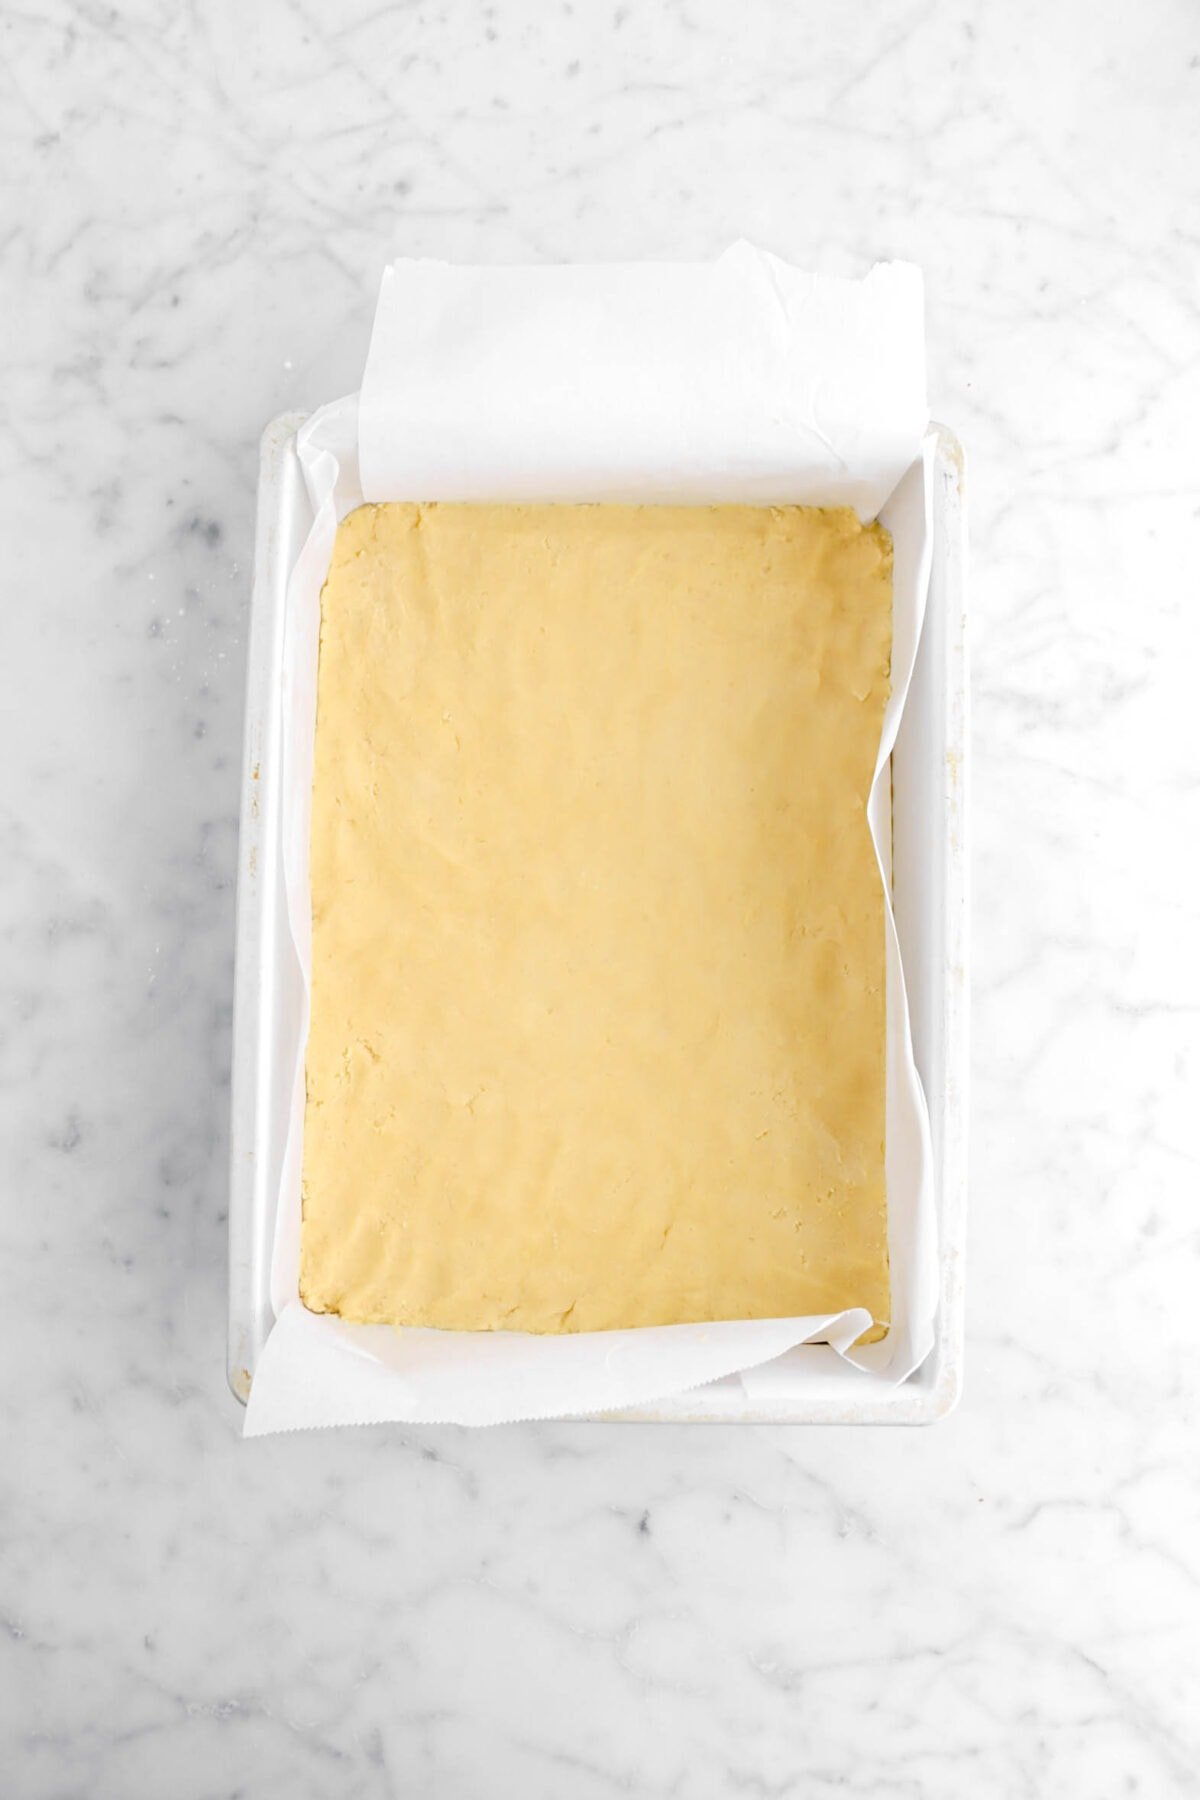 shortbread cookie dough pressed into lined cake pan.